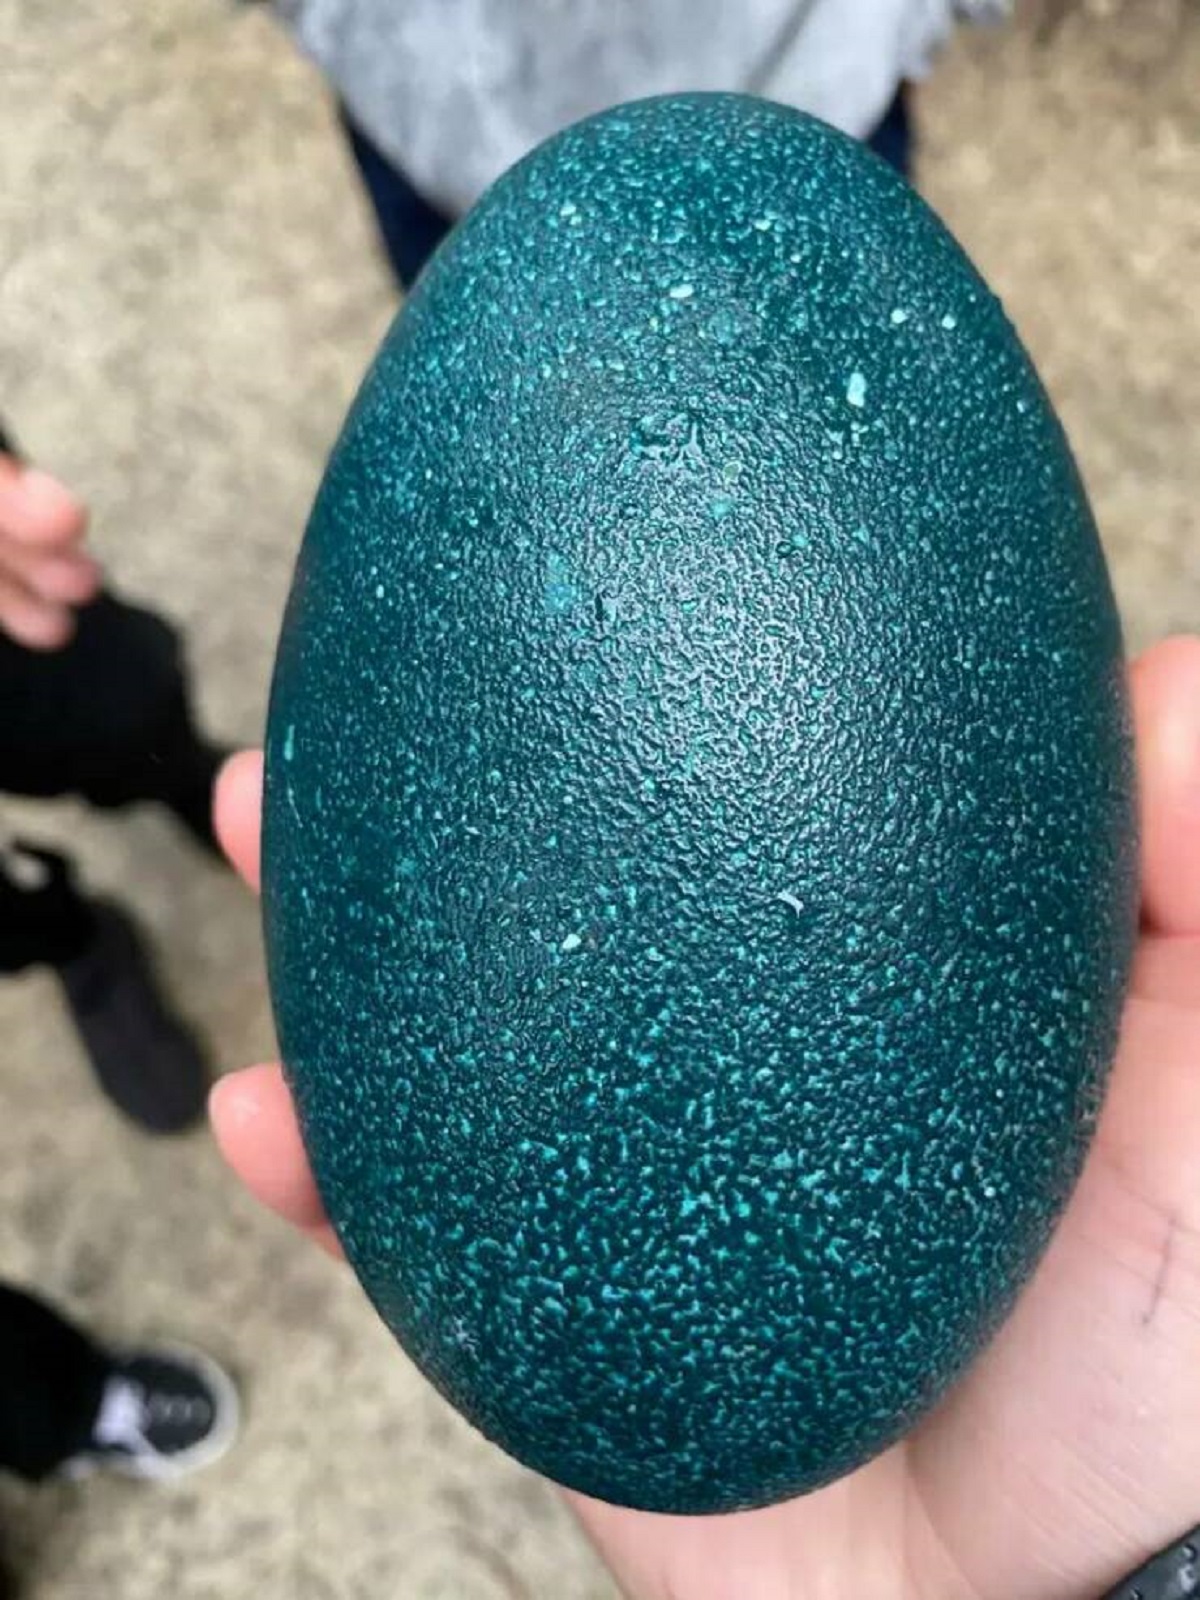 Emu eggs are absolutely beautiful: